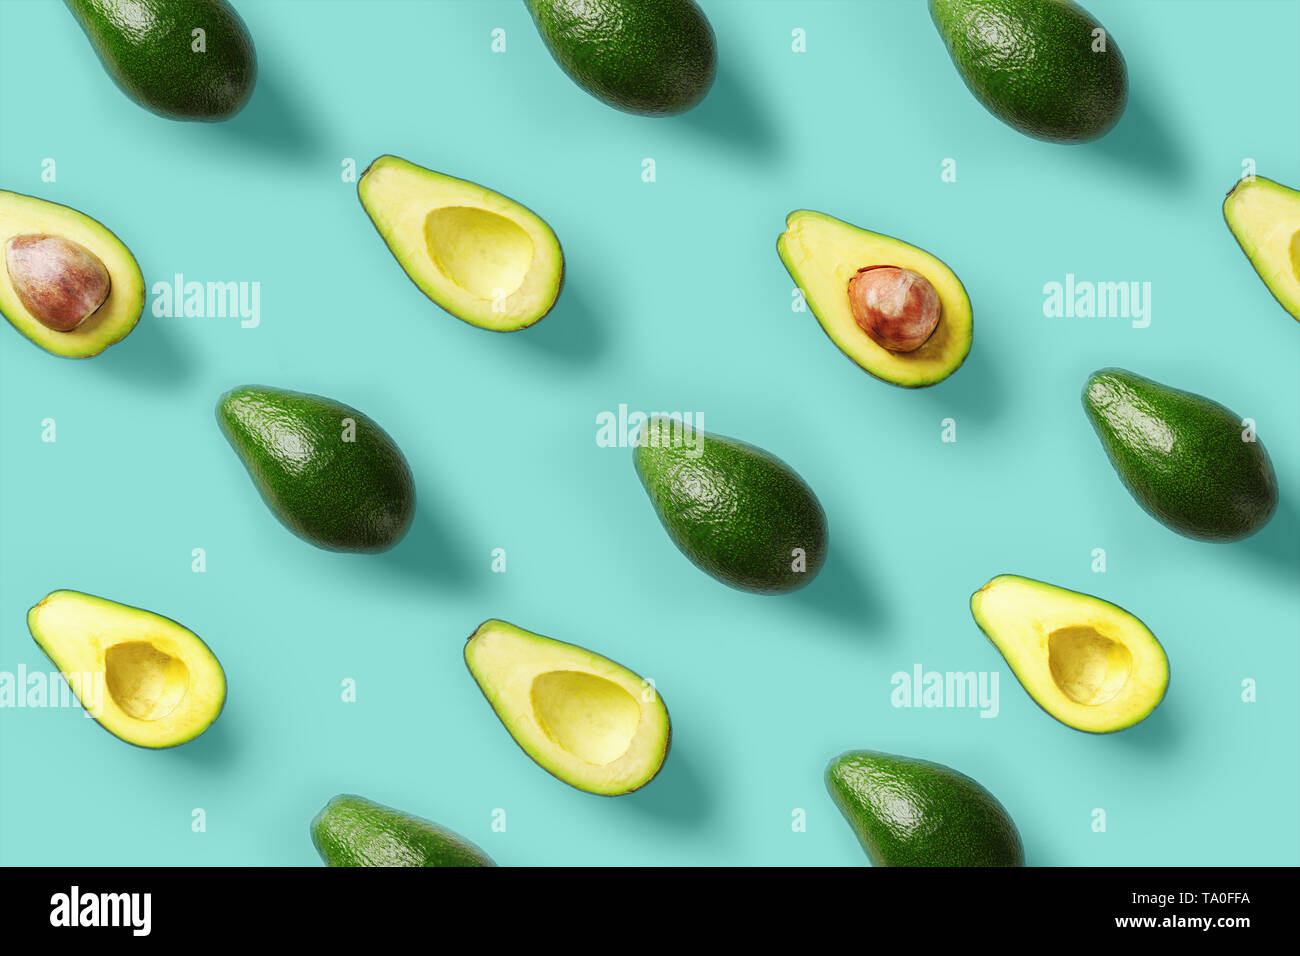 Avocado pattern on blue background. Pop art design, creative summer food concept. Green avocadoes, minimal flat lay style. Top view. Stock Photo